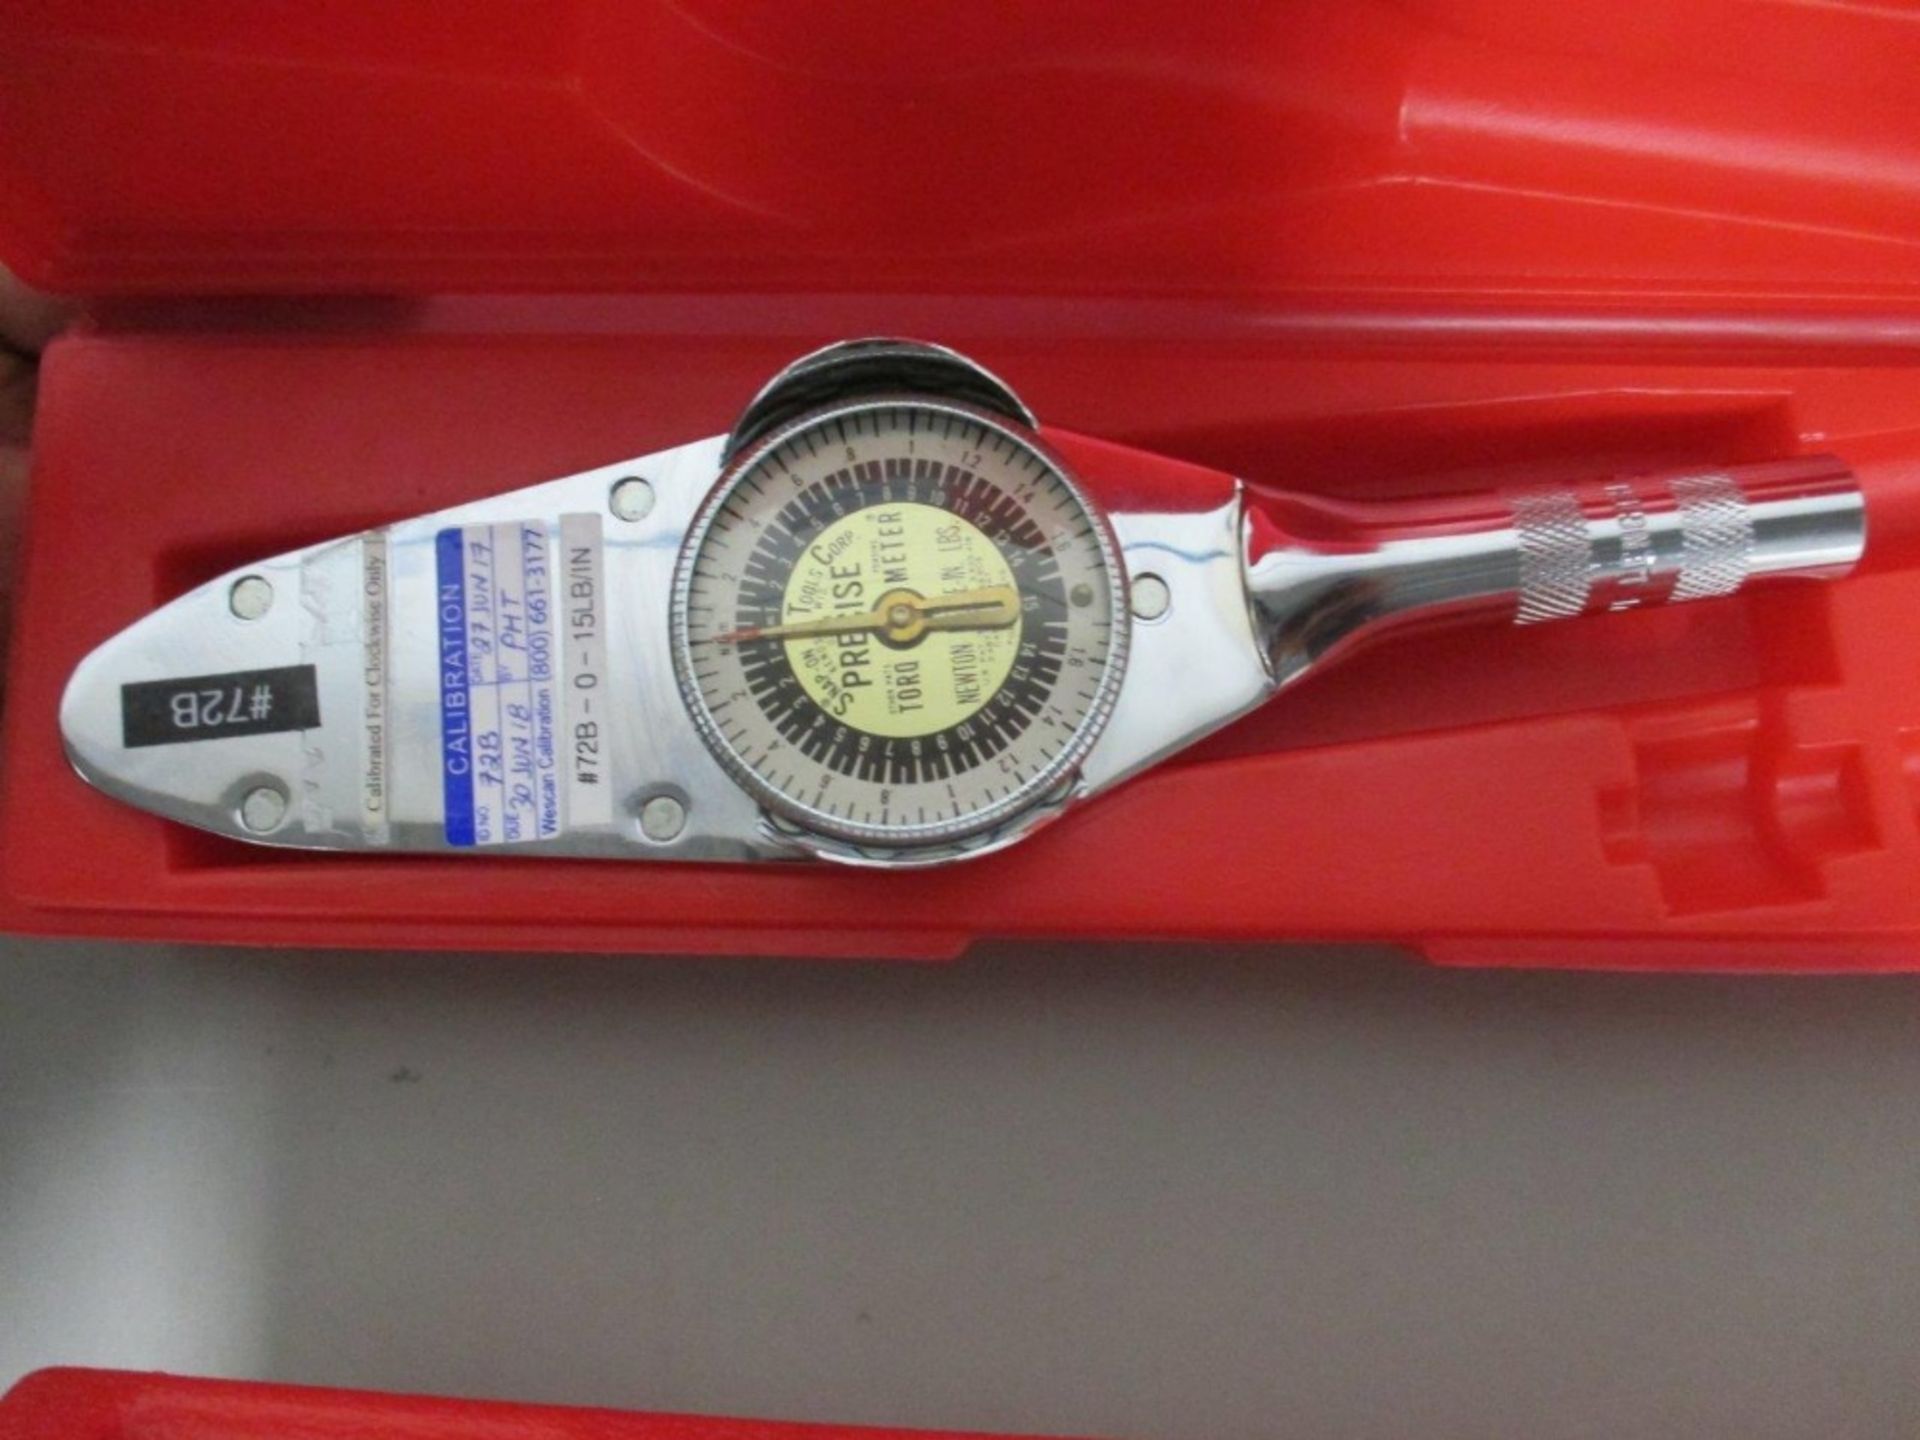 2 x Snap On Torque Wrench 1 x 15lb Torque Wrench 1 x 30lb Torque Wrench 2 x Snap On Torque Wrench - Image 3 of 3